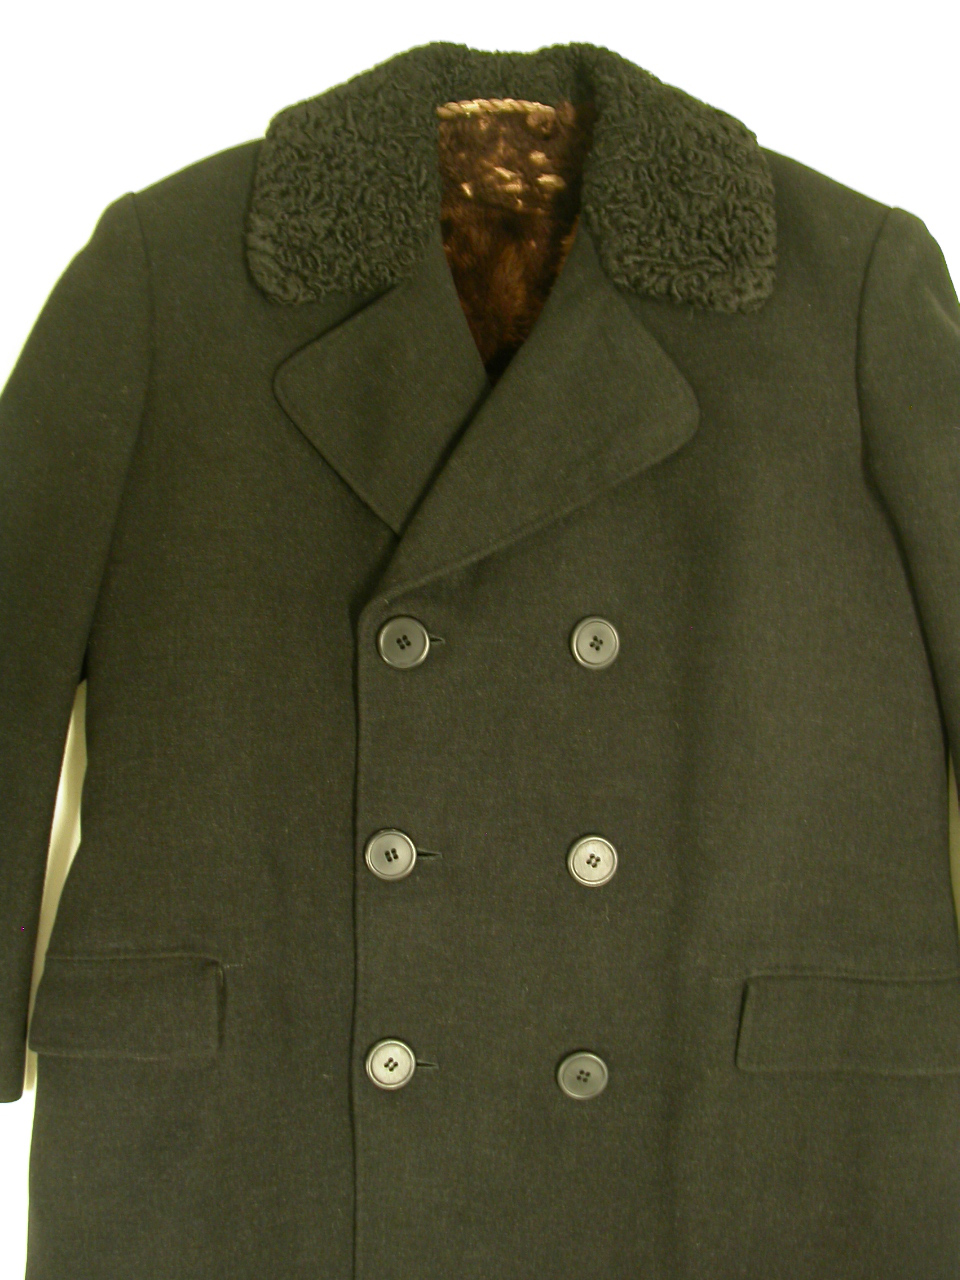 Photo of a military-looking jacket